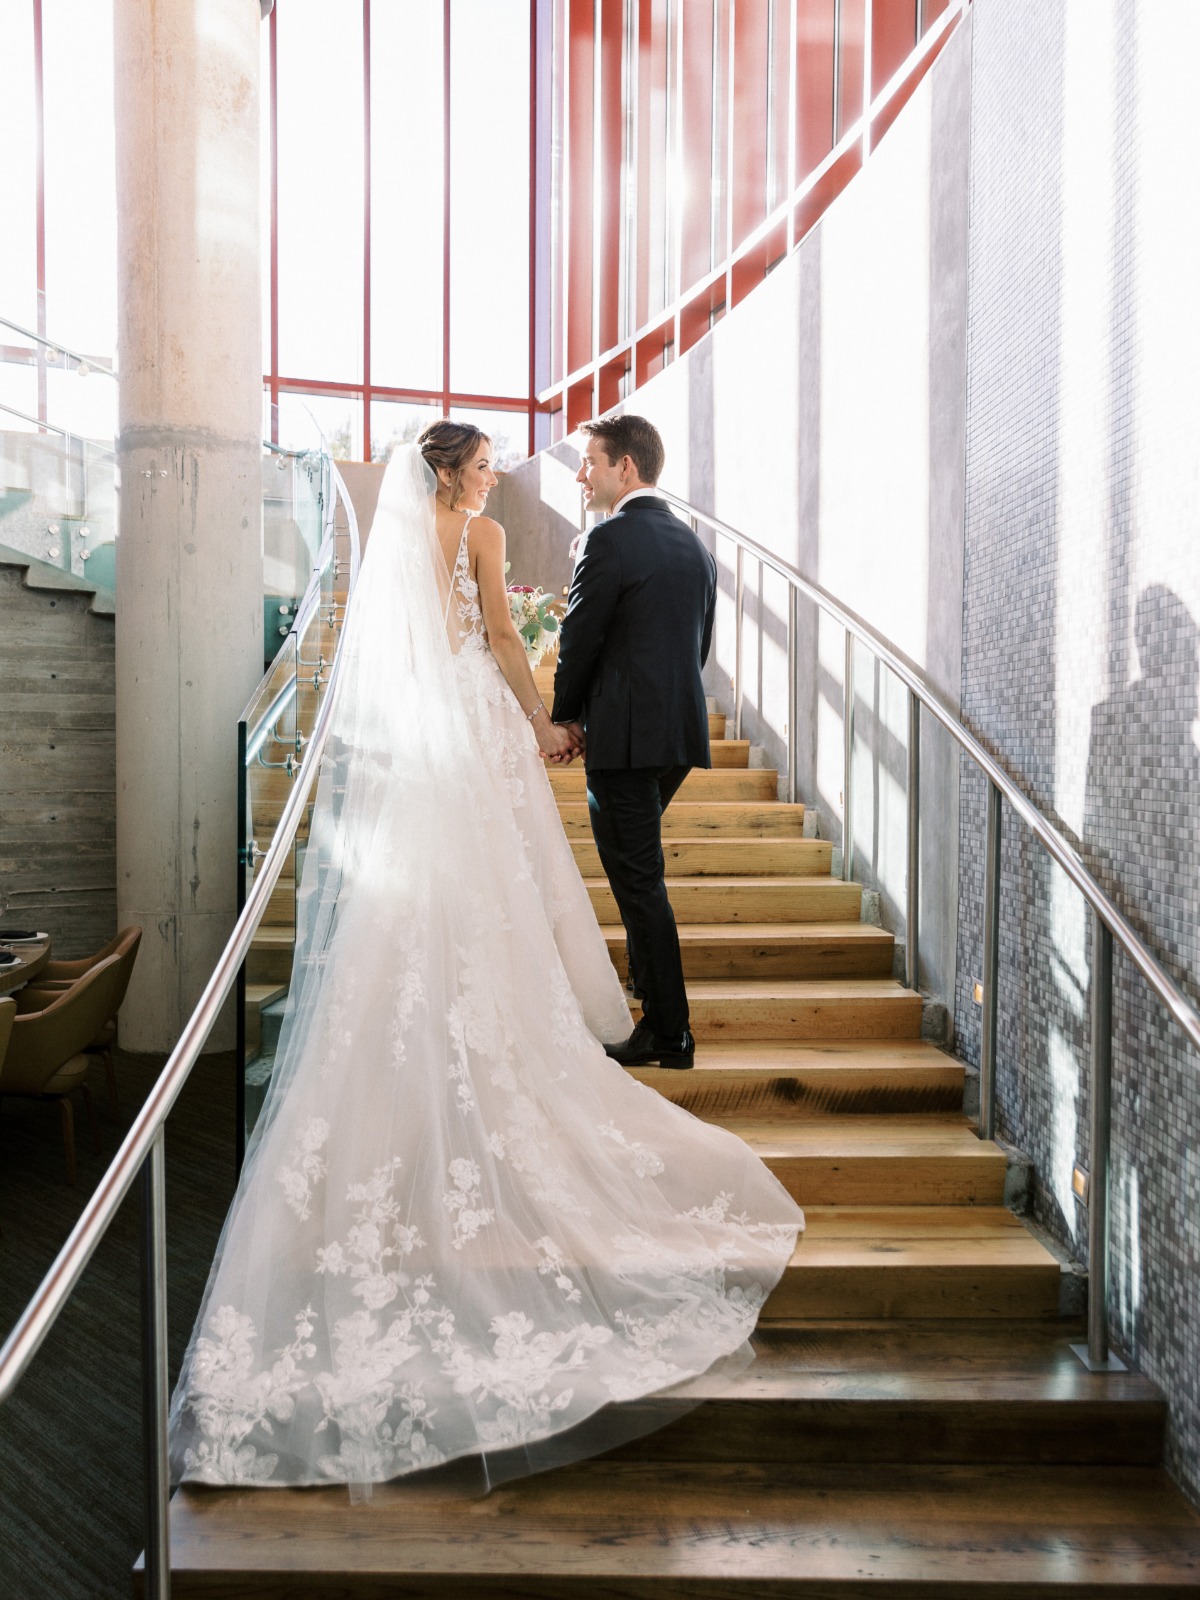 You've Never Seen A Florida Wedding Like This Before